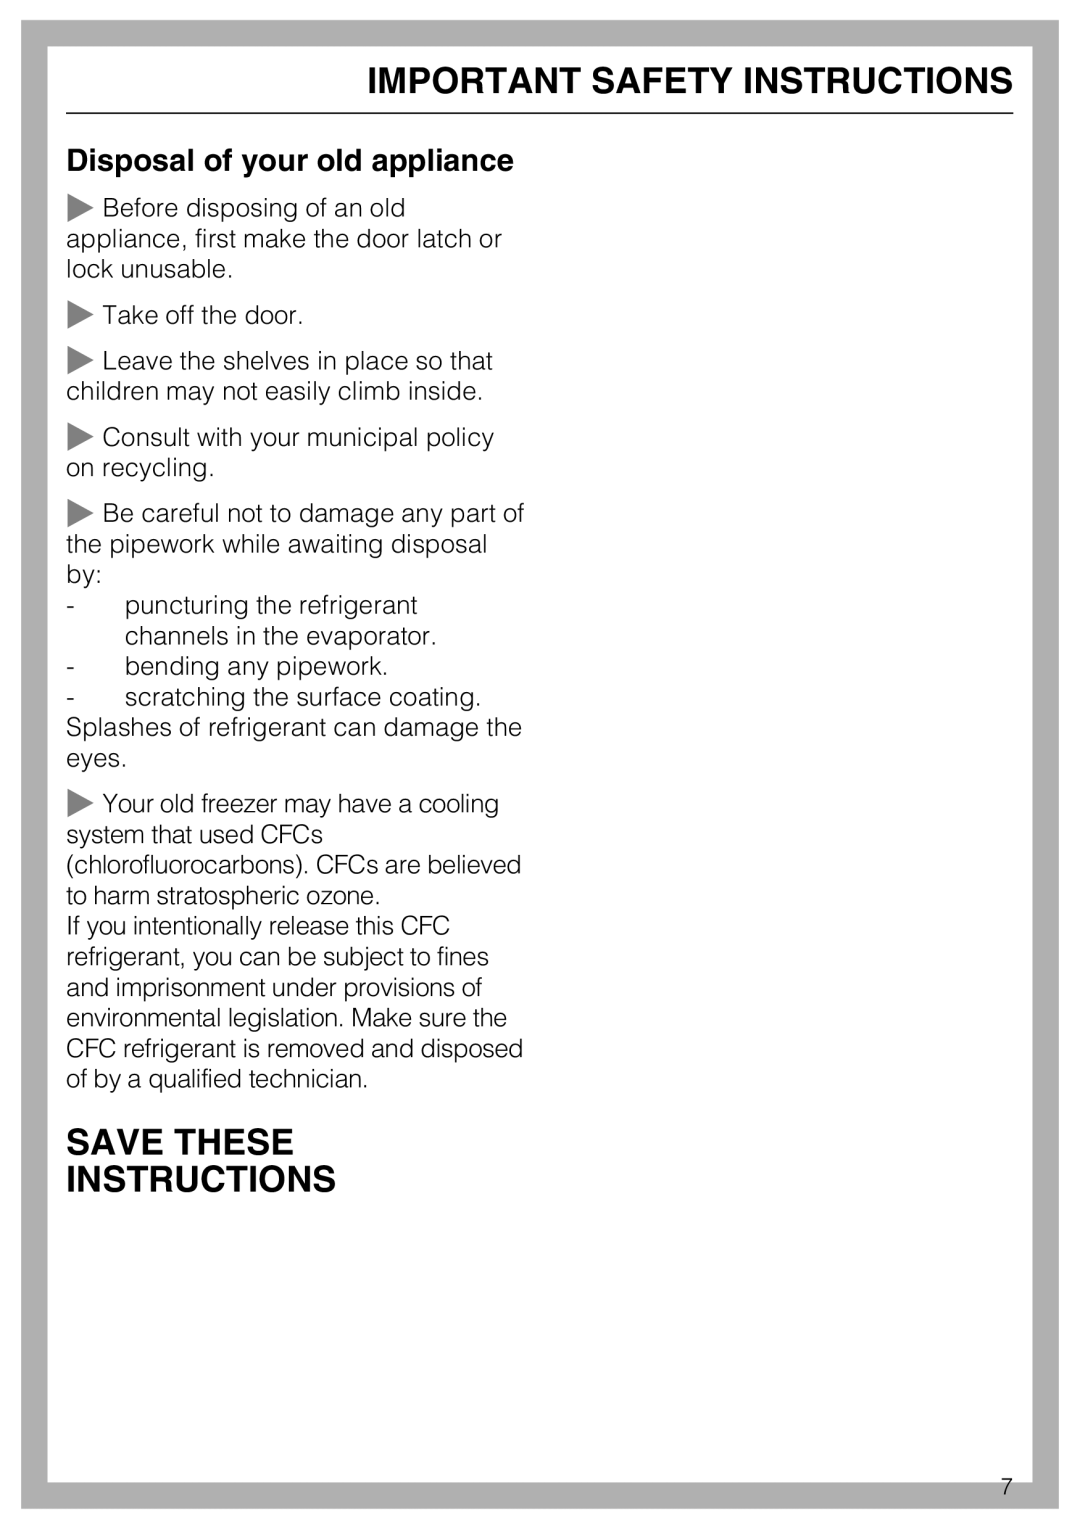 Miele F1471VI Save These Instructions, Disposal of your old appliance, Important Safety Instructions 